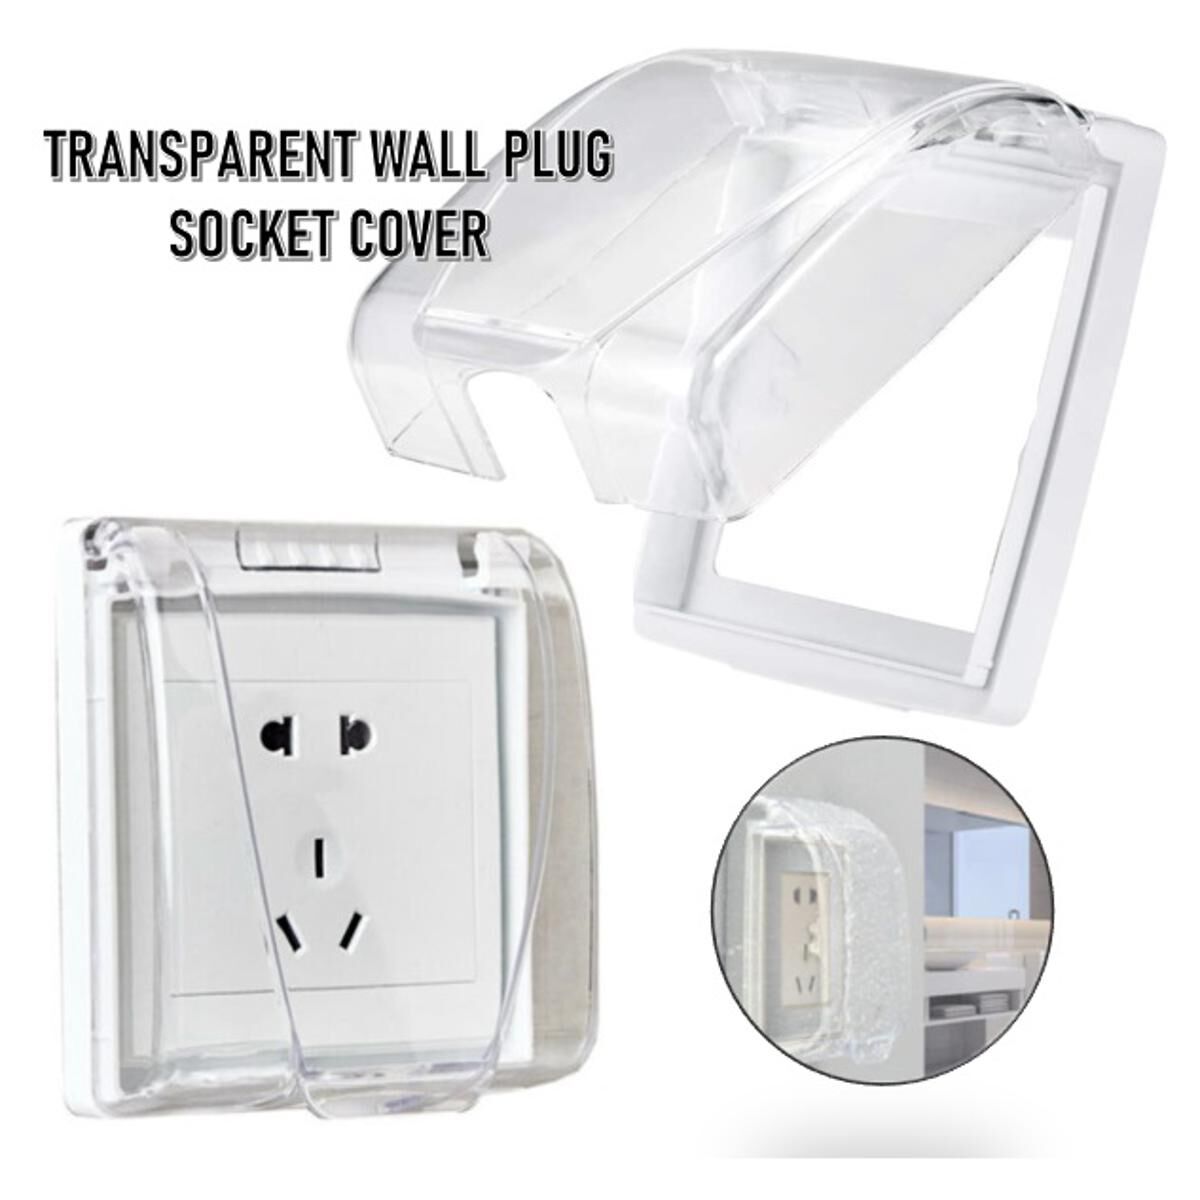 Waterproof Cover Transparent Concealed Switch Box Cover Price in Pakistan 